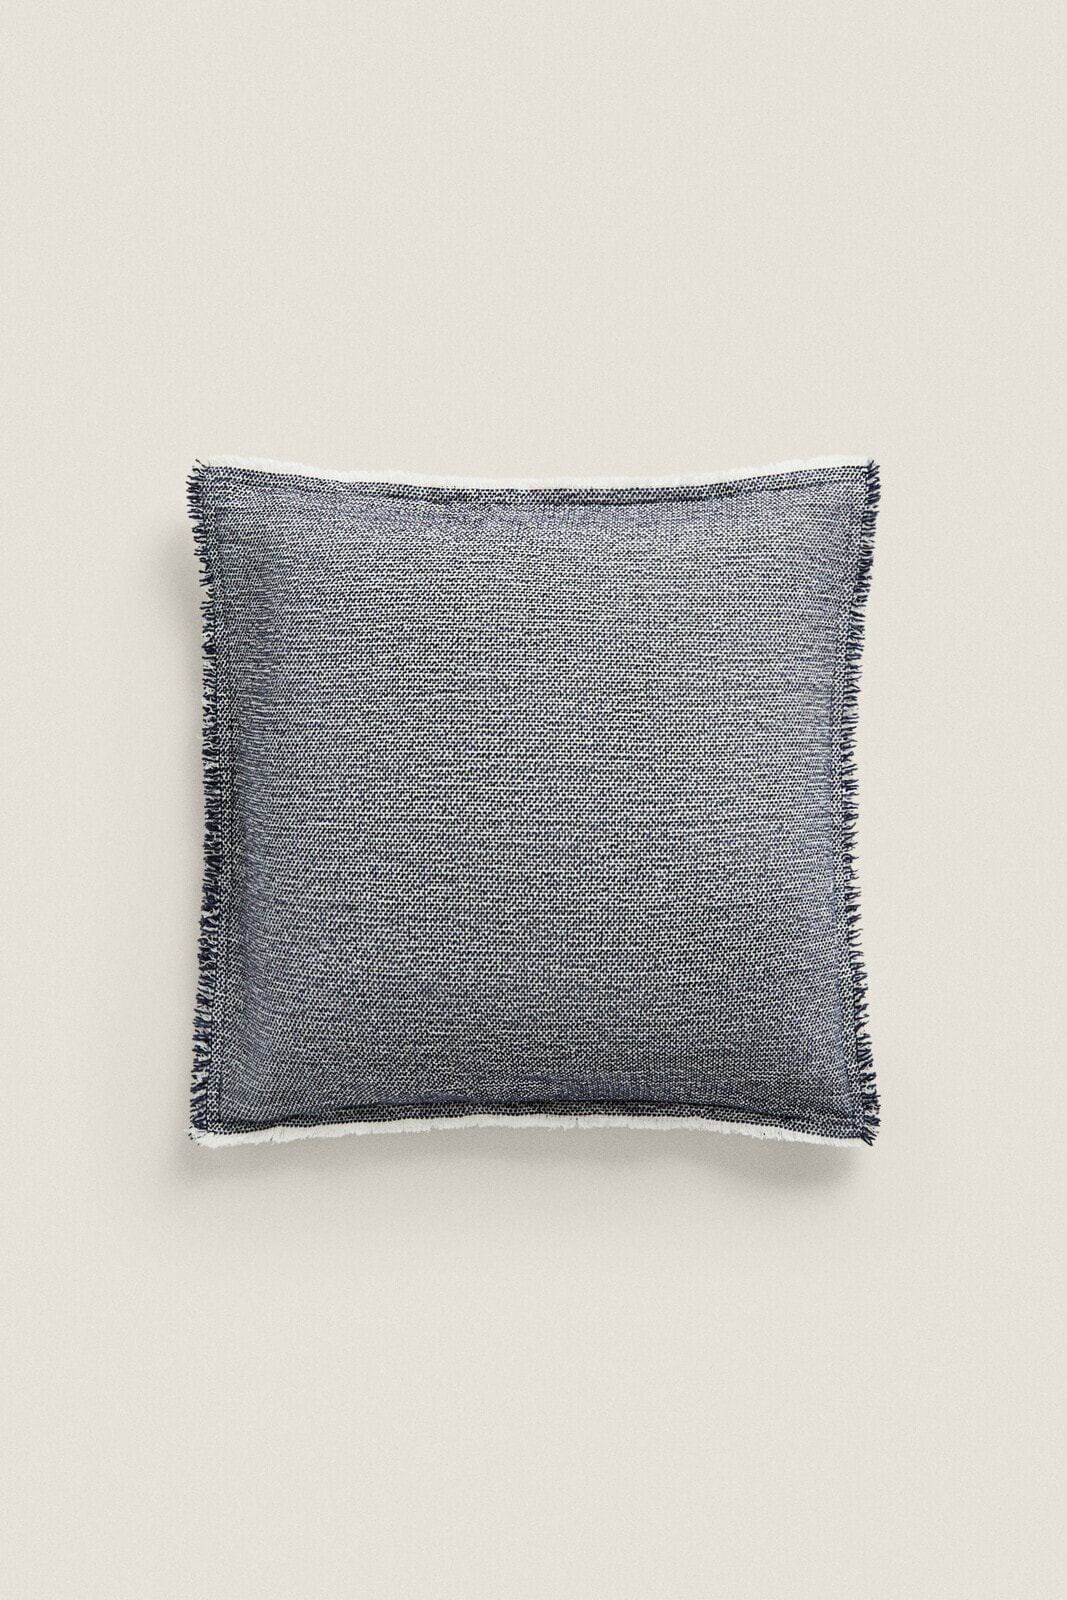 Contrast cushion cover